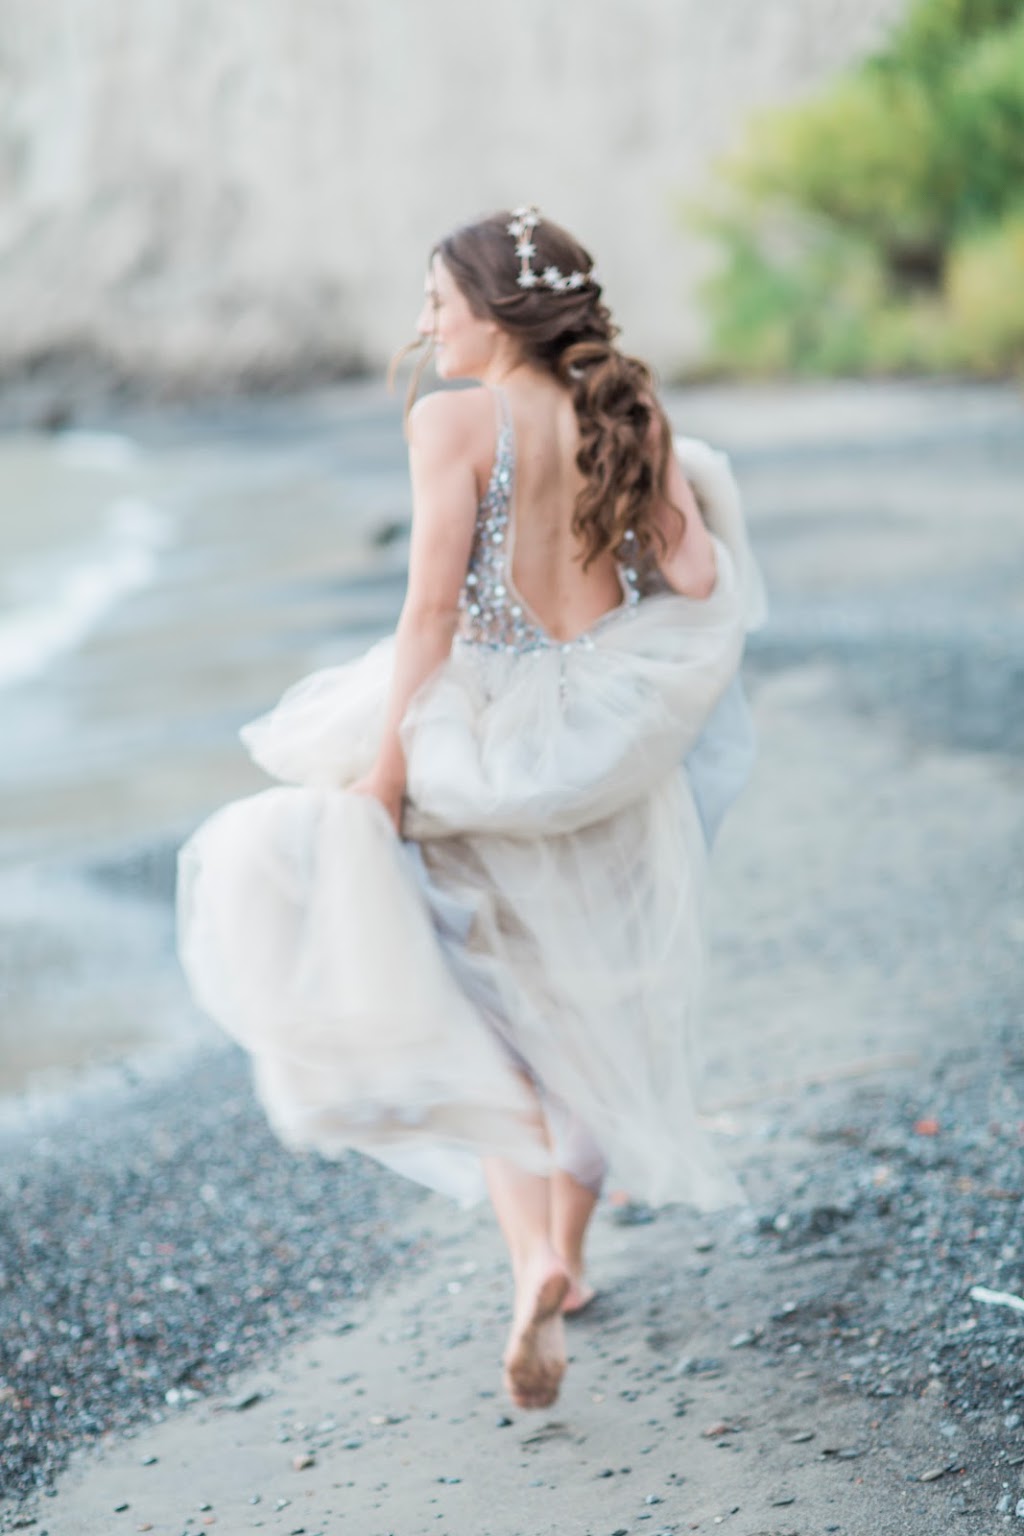 Nicole Charlton Photography | 321Parkside Drive, Waterdown, ON L0R 2H0, Canada | Phone: (905) 819-6789